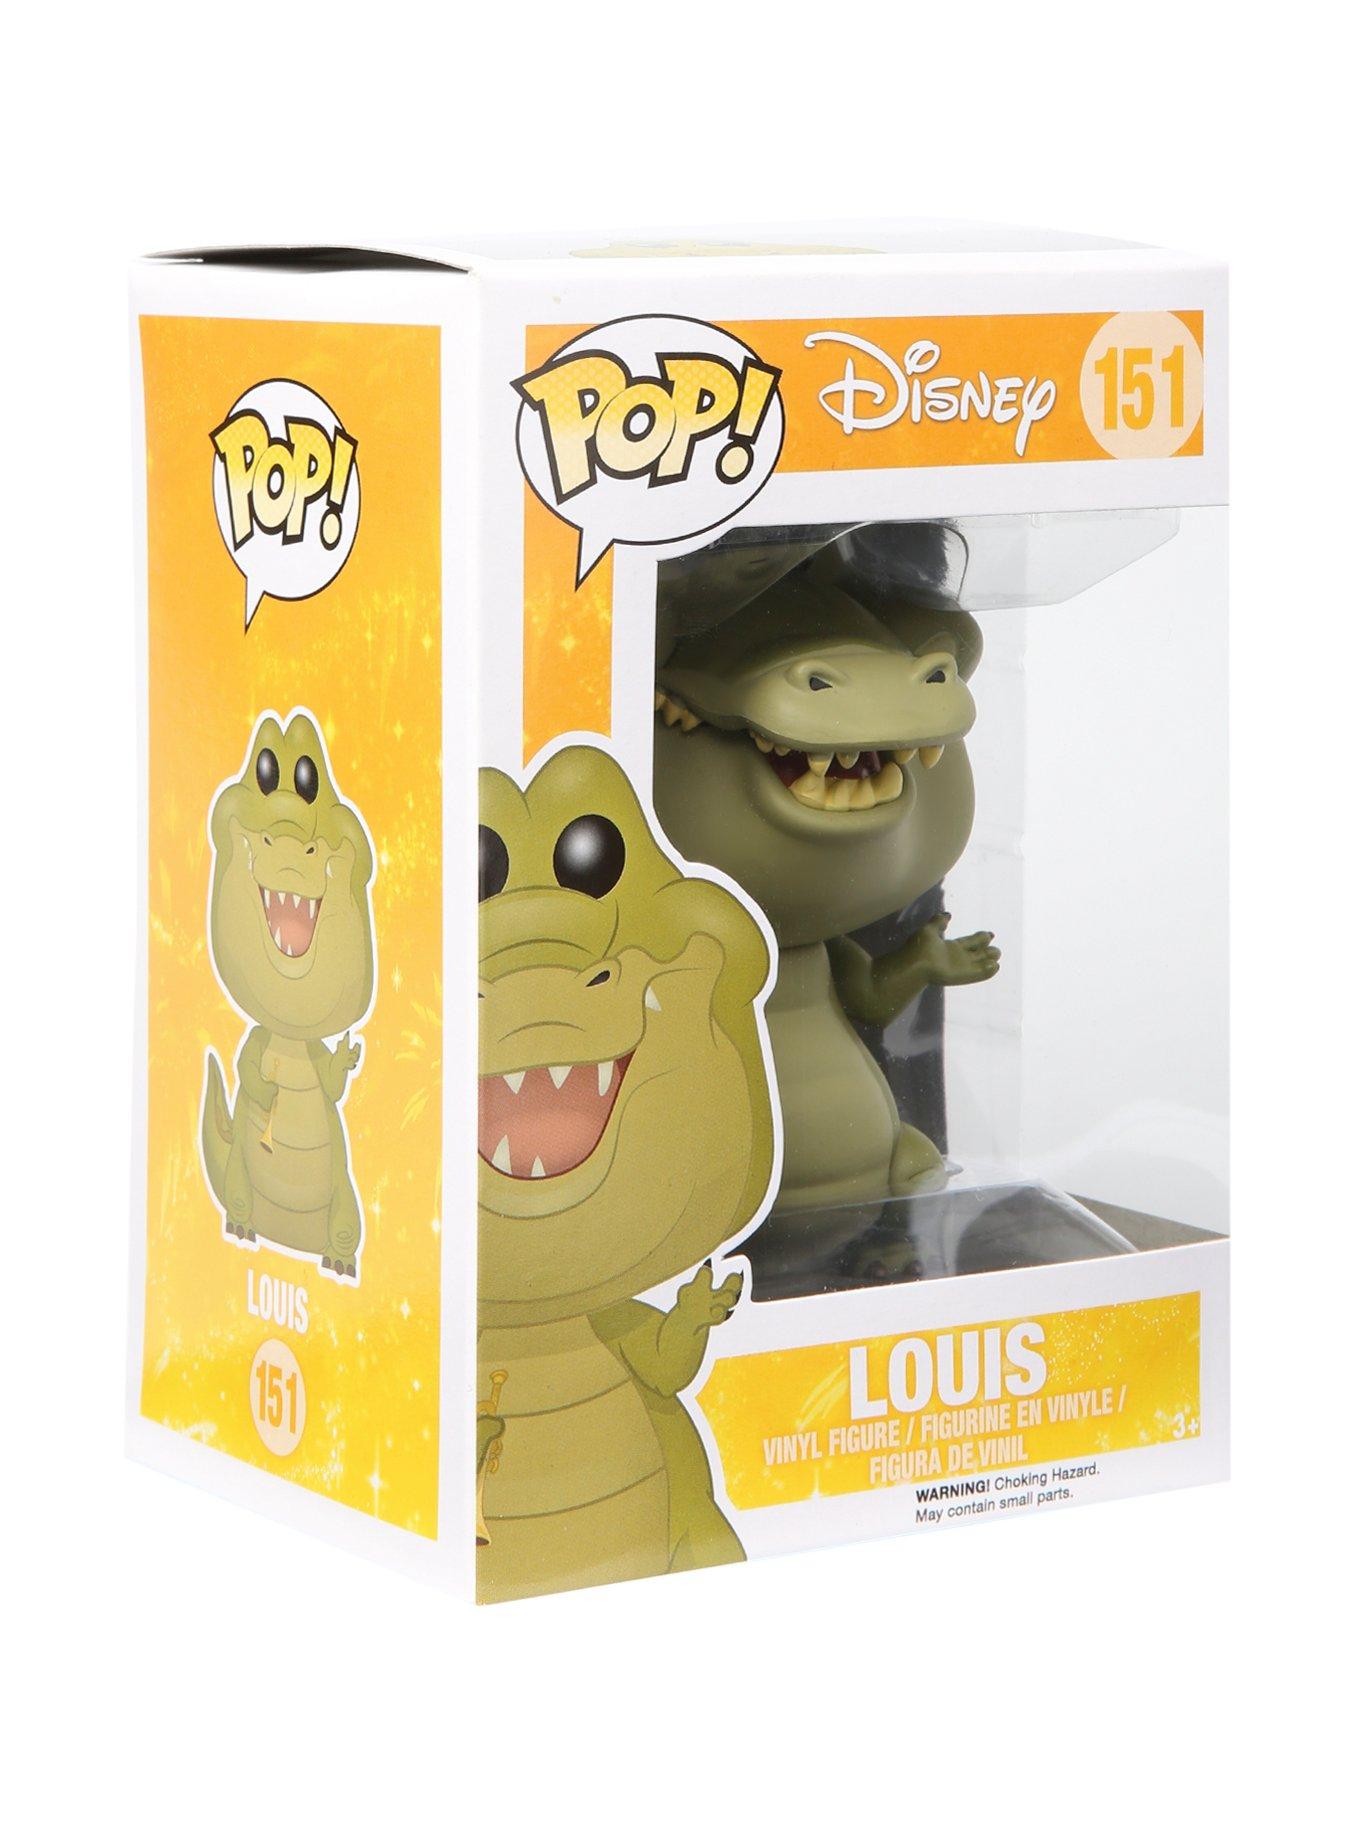 DLR/WDW - Disney100 Decades - 2000s The Princess and the Frog Louis & —  USShoppingSOS